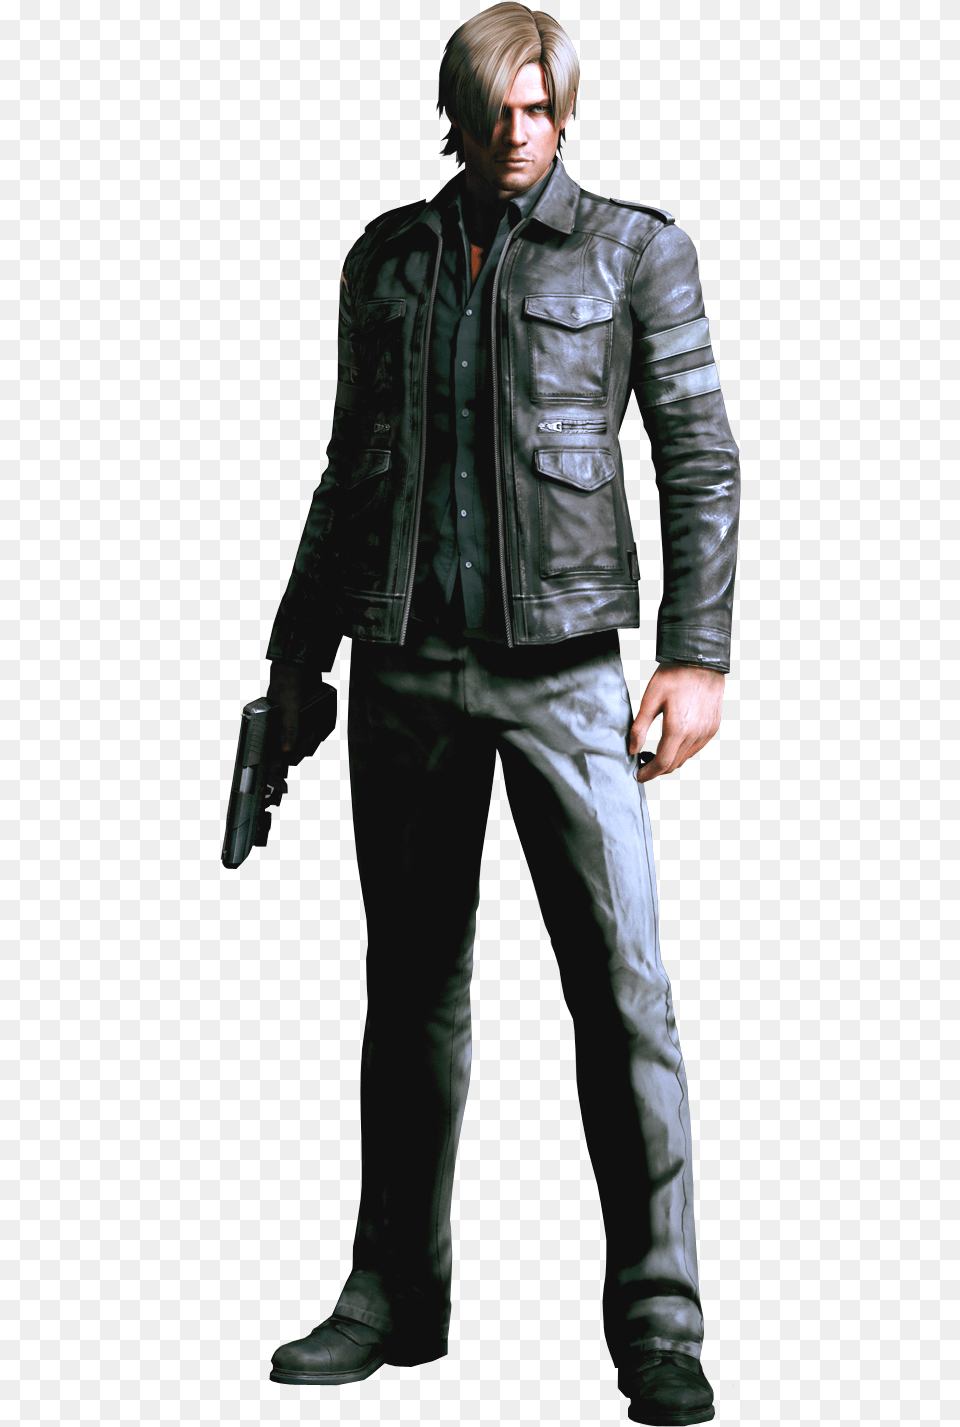 Leon Kennedy Resident Evil 6 Jacket, Clothing, Coat, Person, Man Png